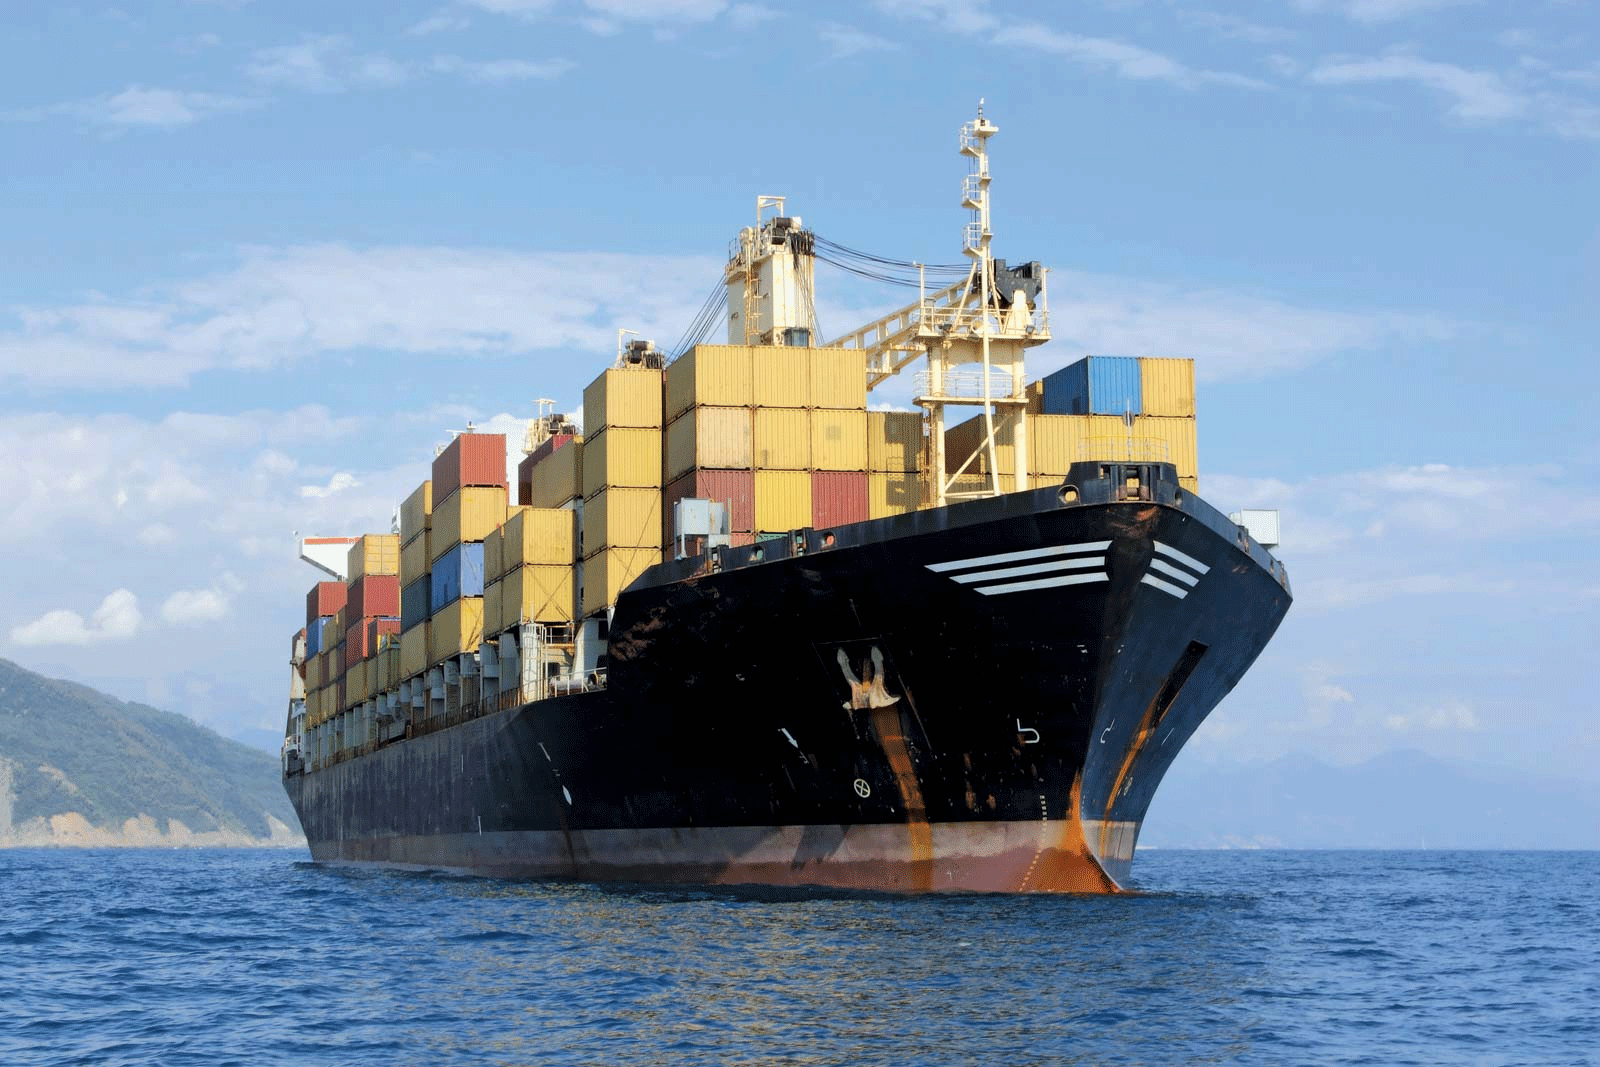 Increased bilateral trade between Pakistan and West Asian countries